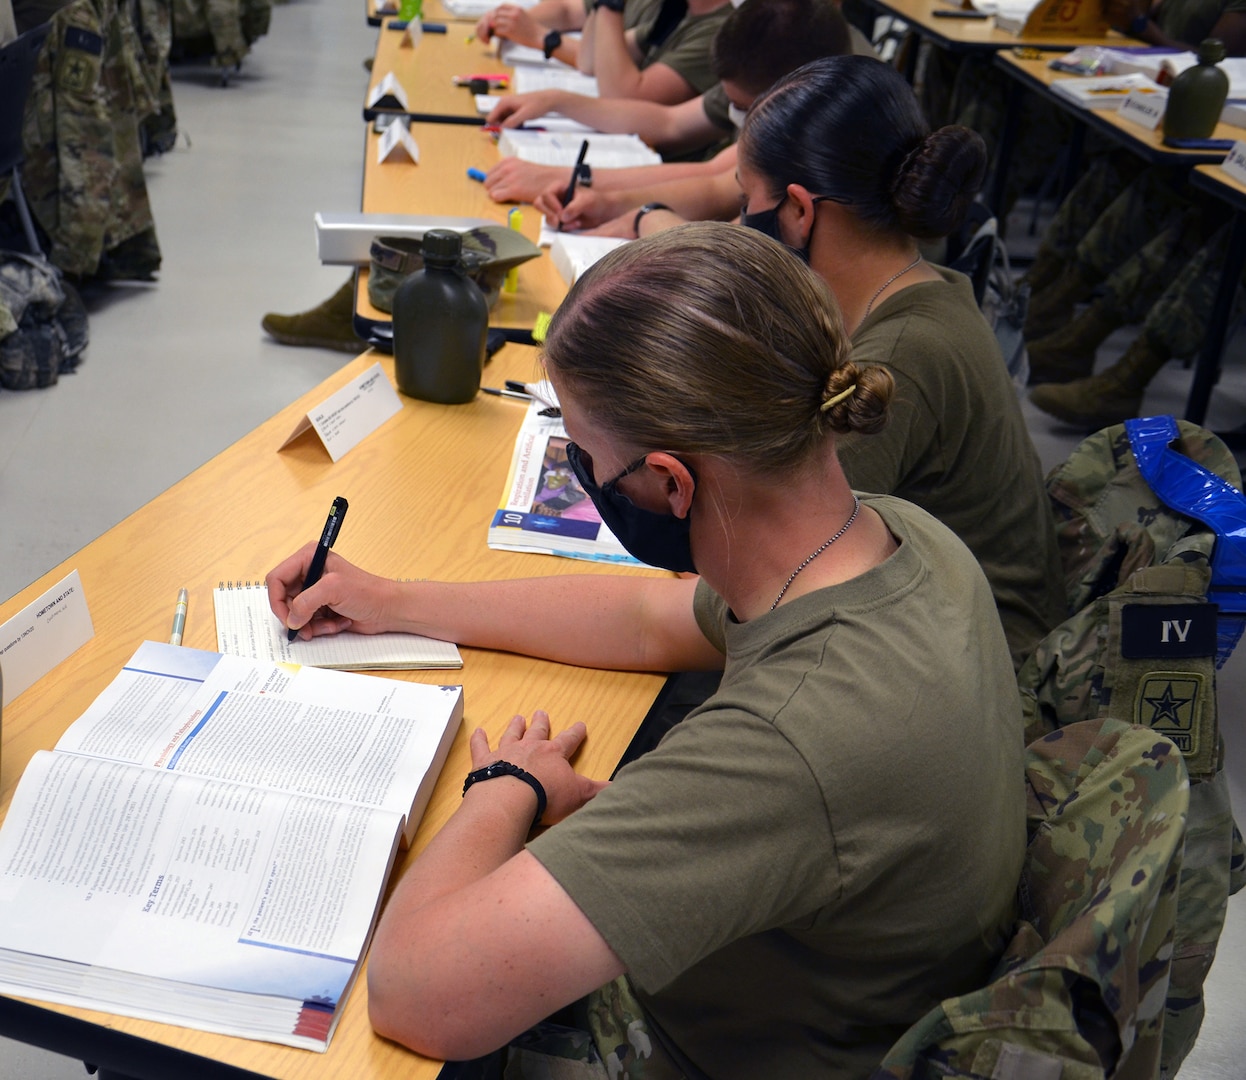 Students in the Combat Medic Specialist Training Program, or CMSTP, second training shift take notes during a lecture in the Emergency Medical Technician course.